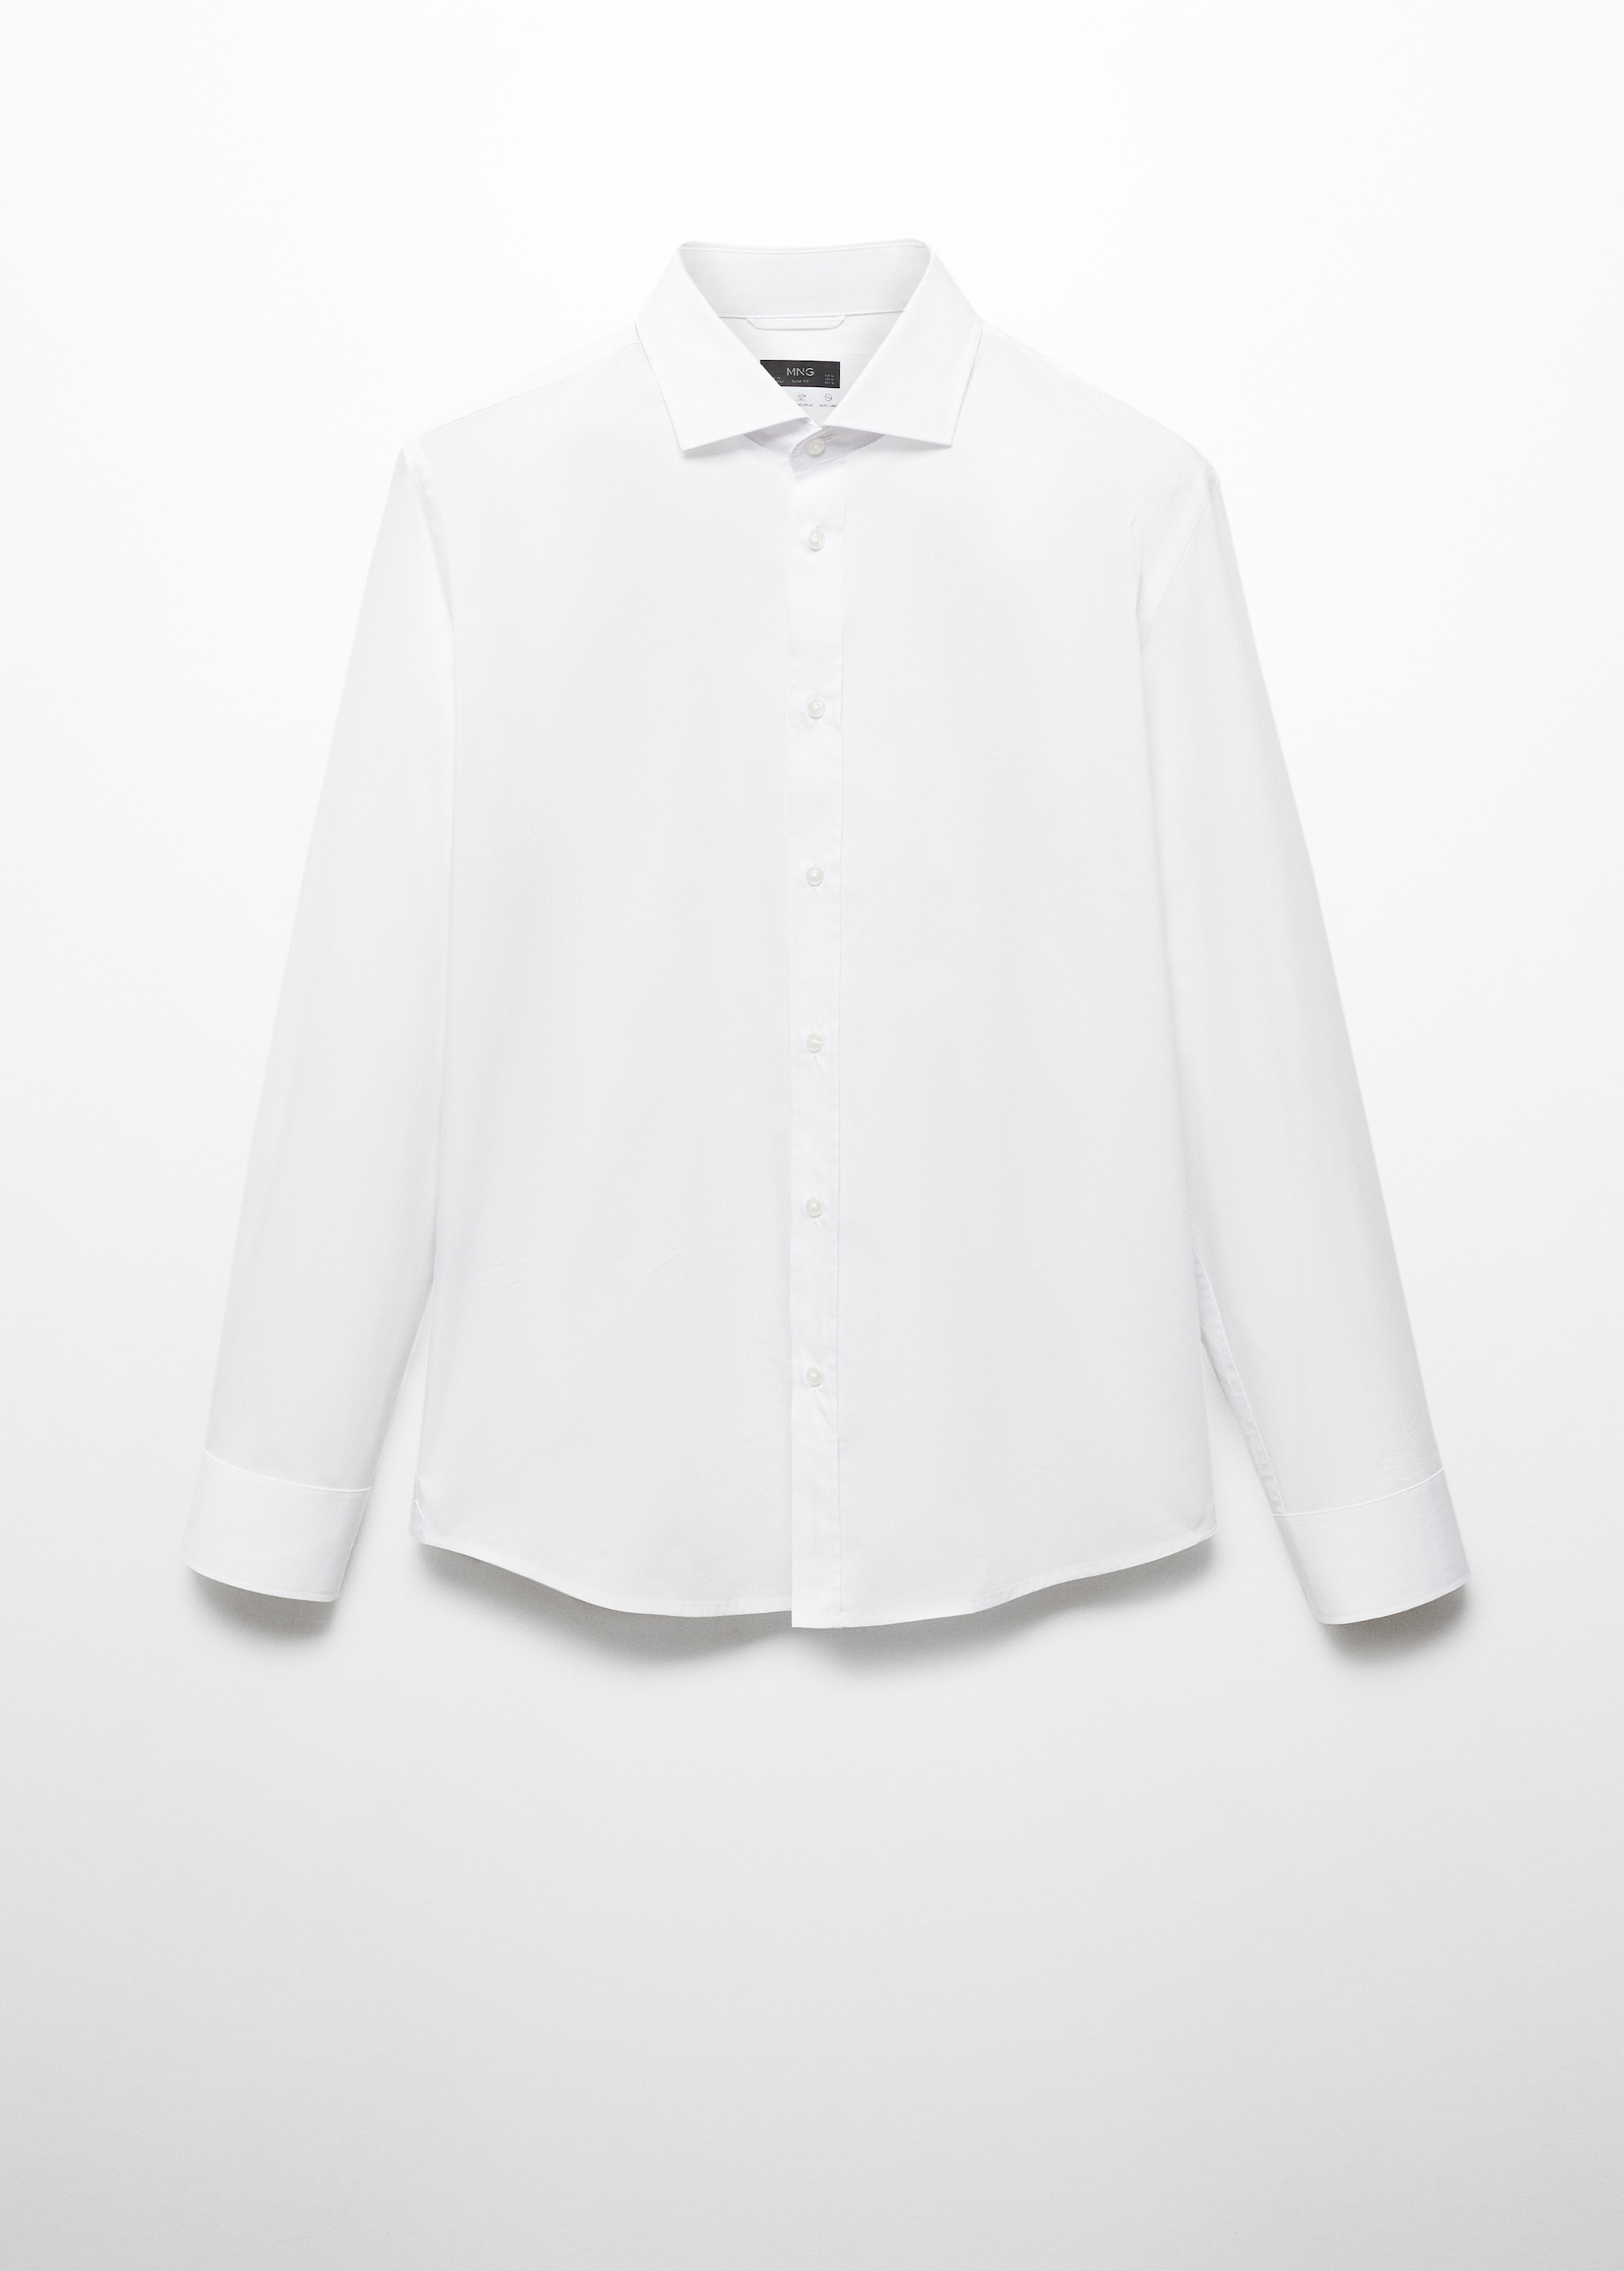 Coolmax® cotton shirt - Article without model